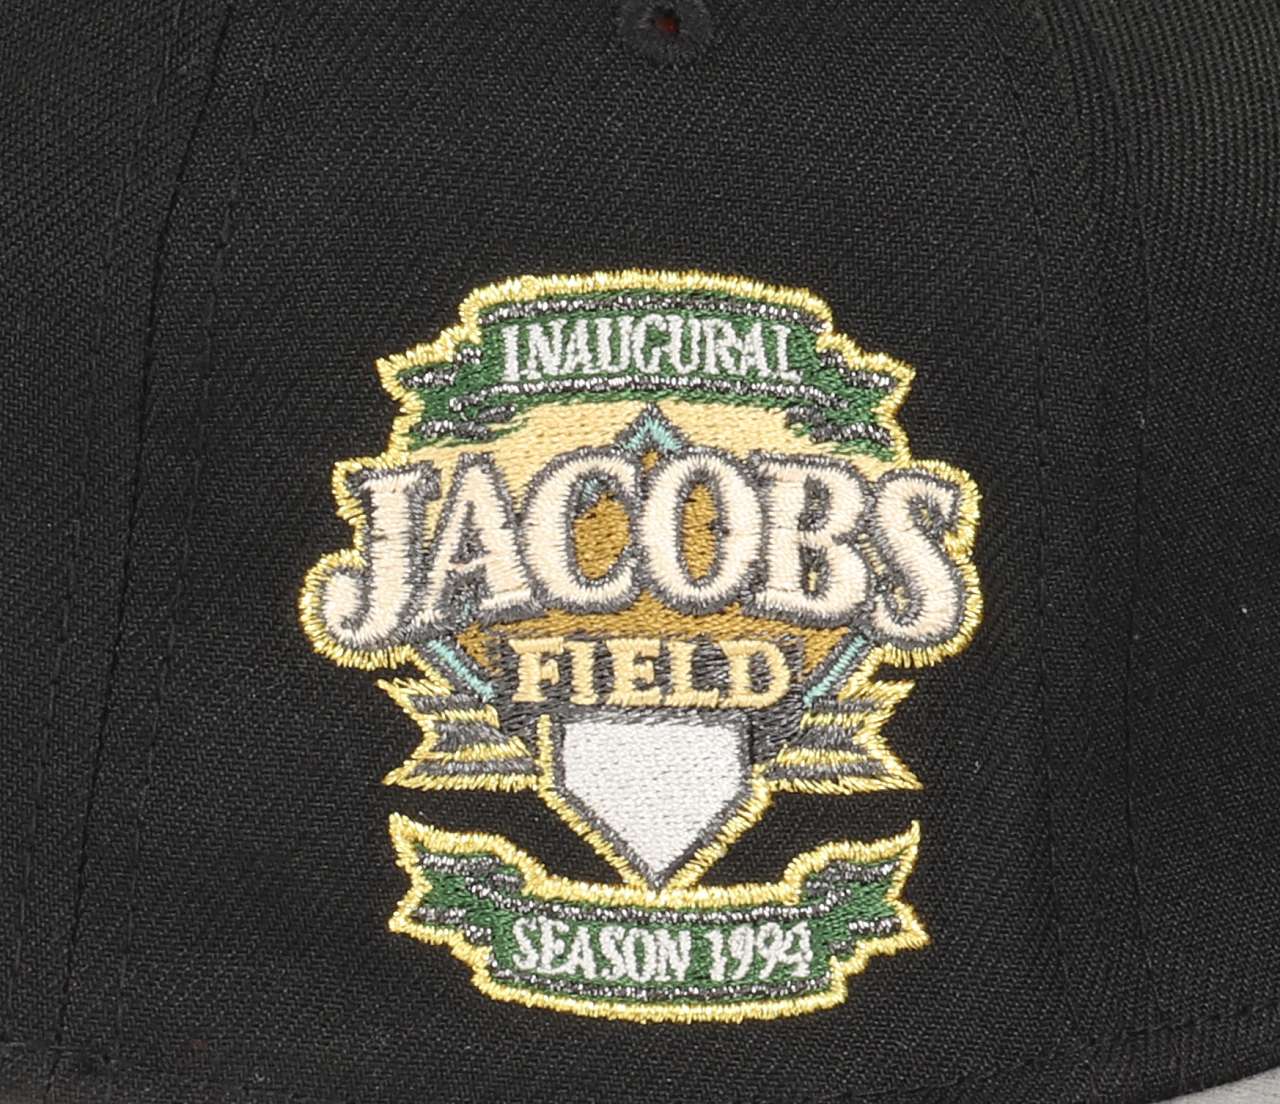 Cleveland Indians MLB Jacobs Field 10th Anniversary Sidepatch Black Misty Green 59Fifty Basecap New Era